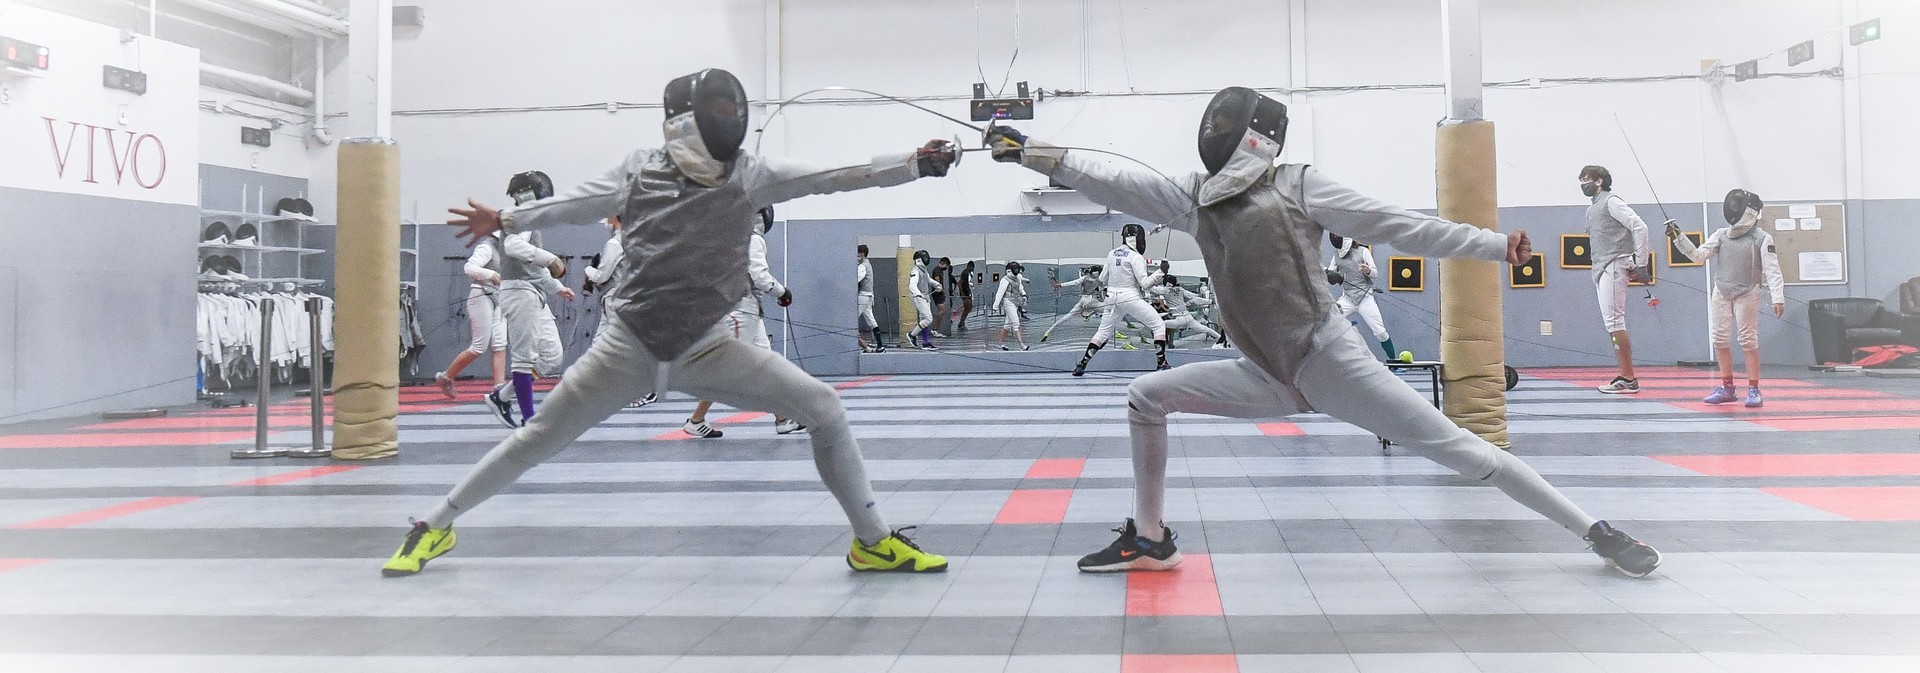 Vivo Fencing Club Free Open House - for Beginners, Haverhill, Massachusetts, United States